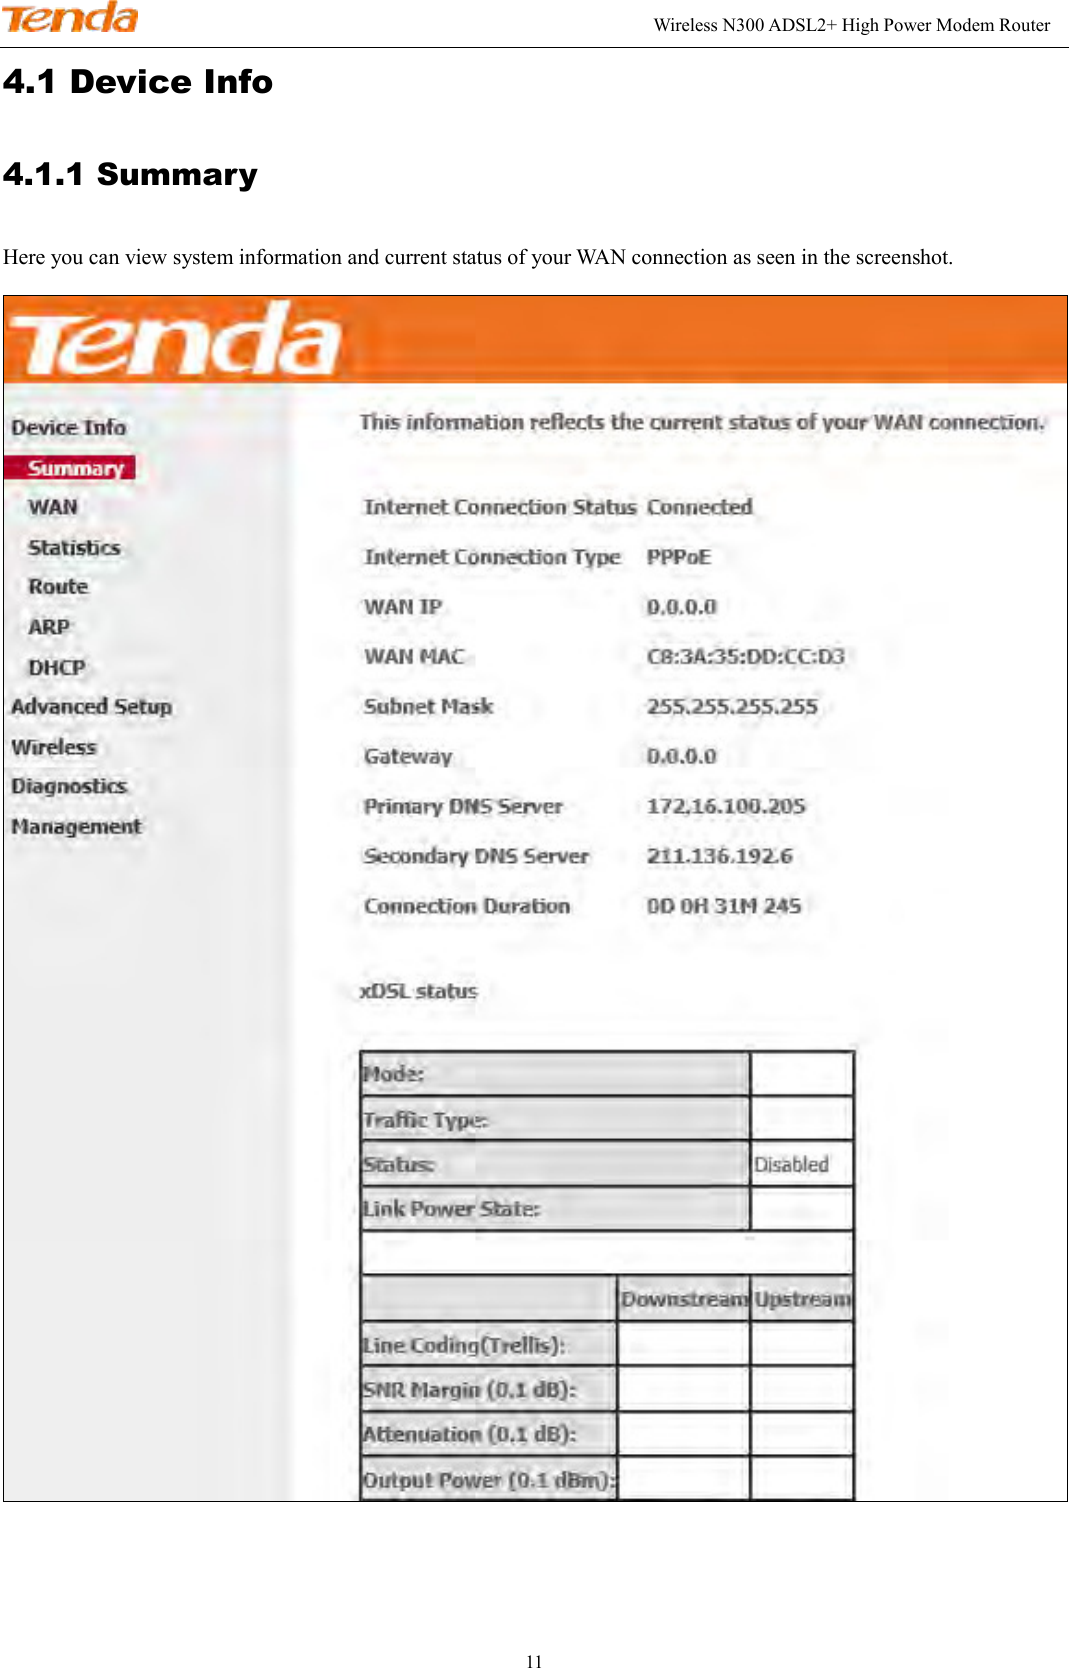                                                                                                               Wireless N300 ADSL2+ High Power Modem Router 11 4.1 Device Info 4.1.1 Summary Here you can view system information and current status of your WAN connection as seen in the screenshot.  